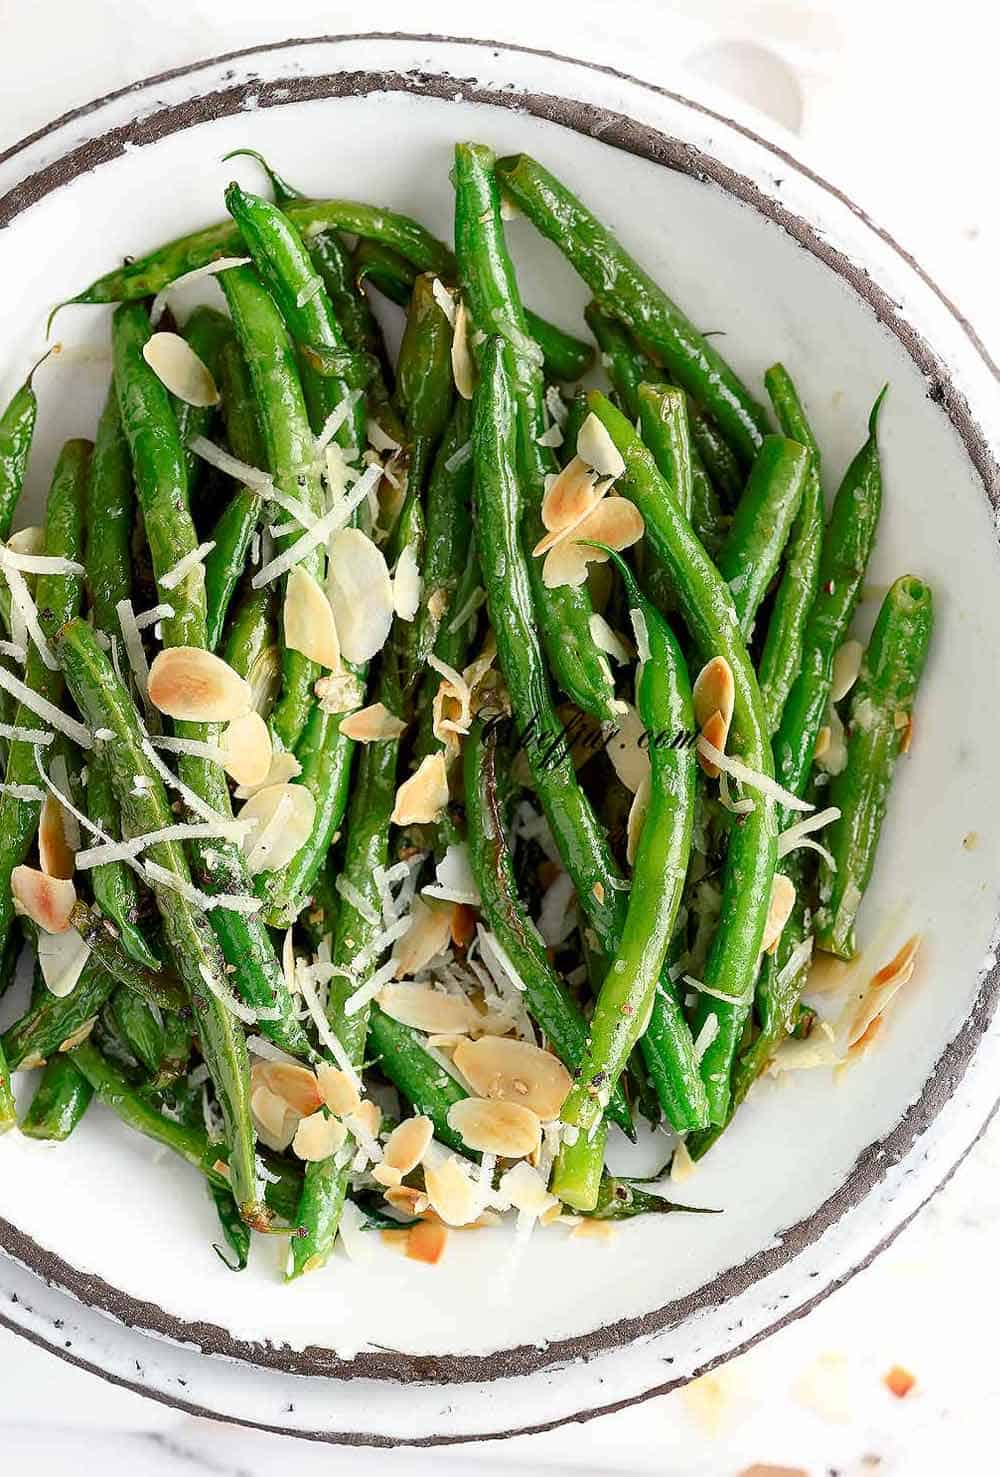 Sauteed-Green-Beans-with-Garlic